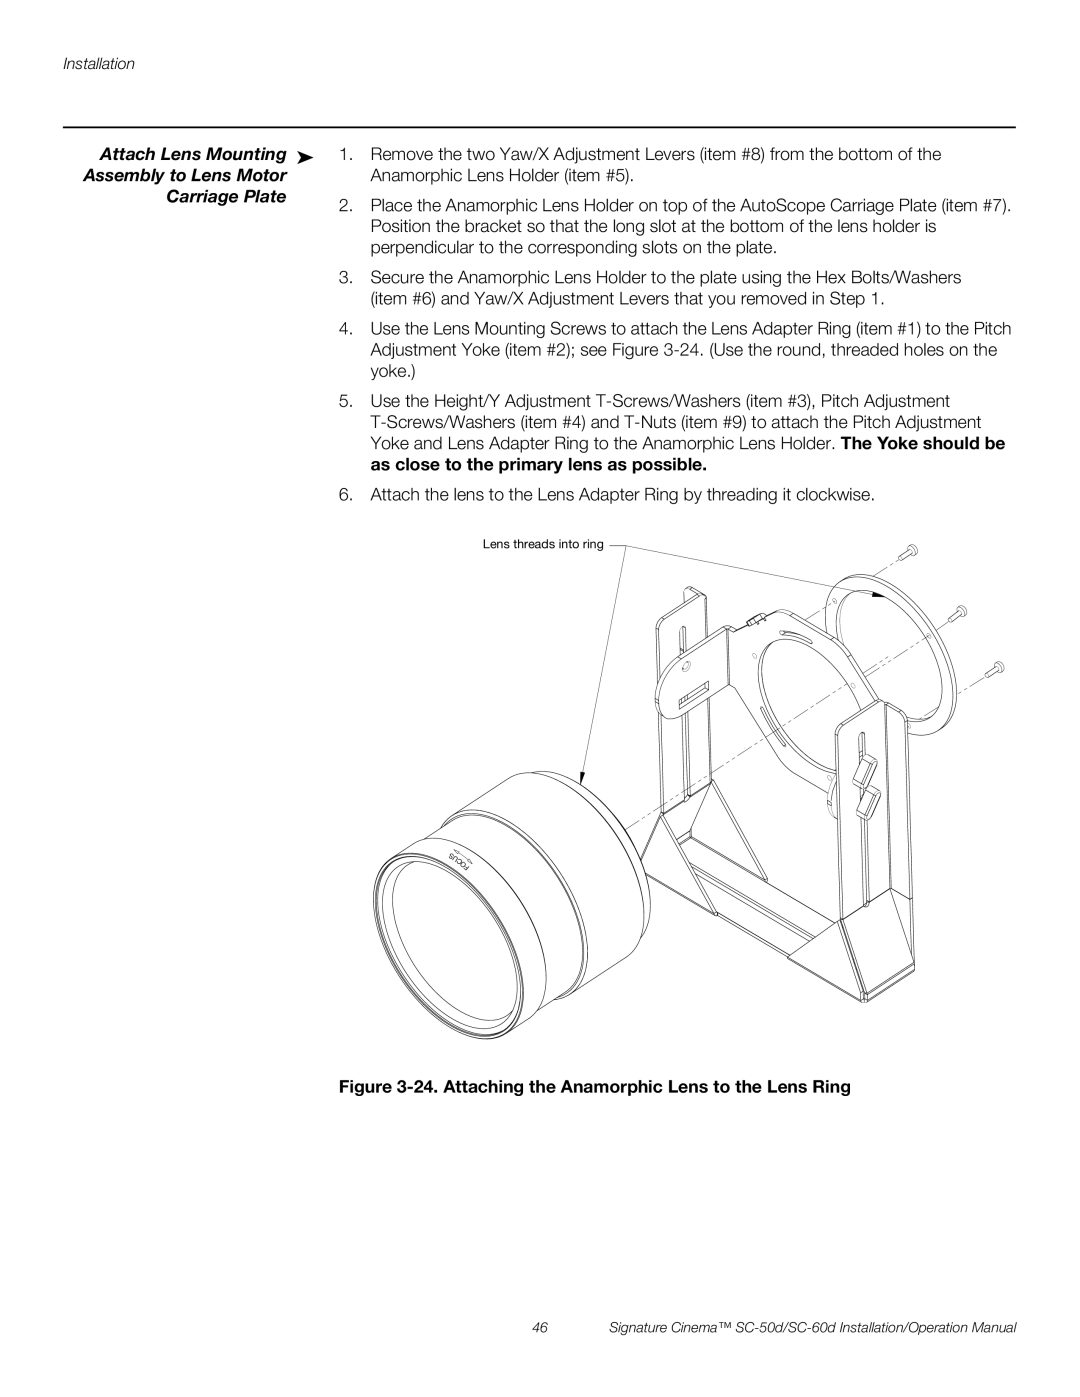 Runco SC-60D Attach Lens Mounting, Assembly to Lens Motor, Carriage Plate, as close to the primary lens as possible 